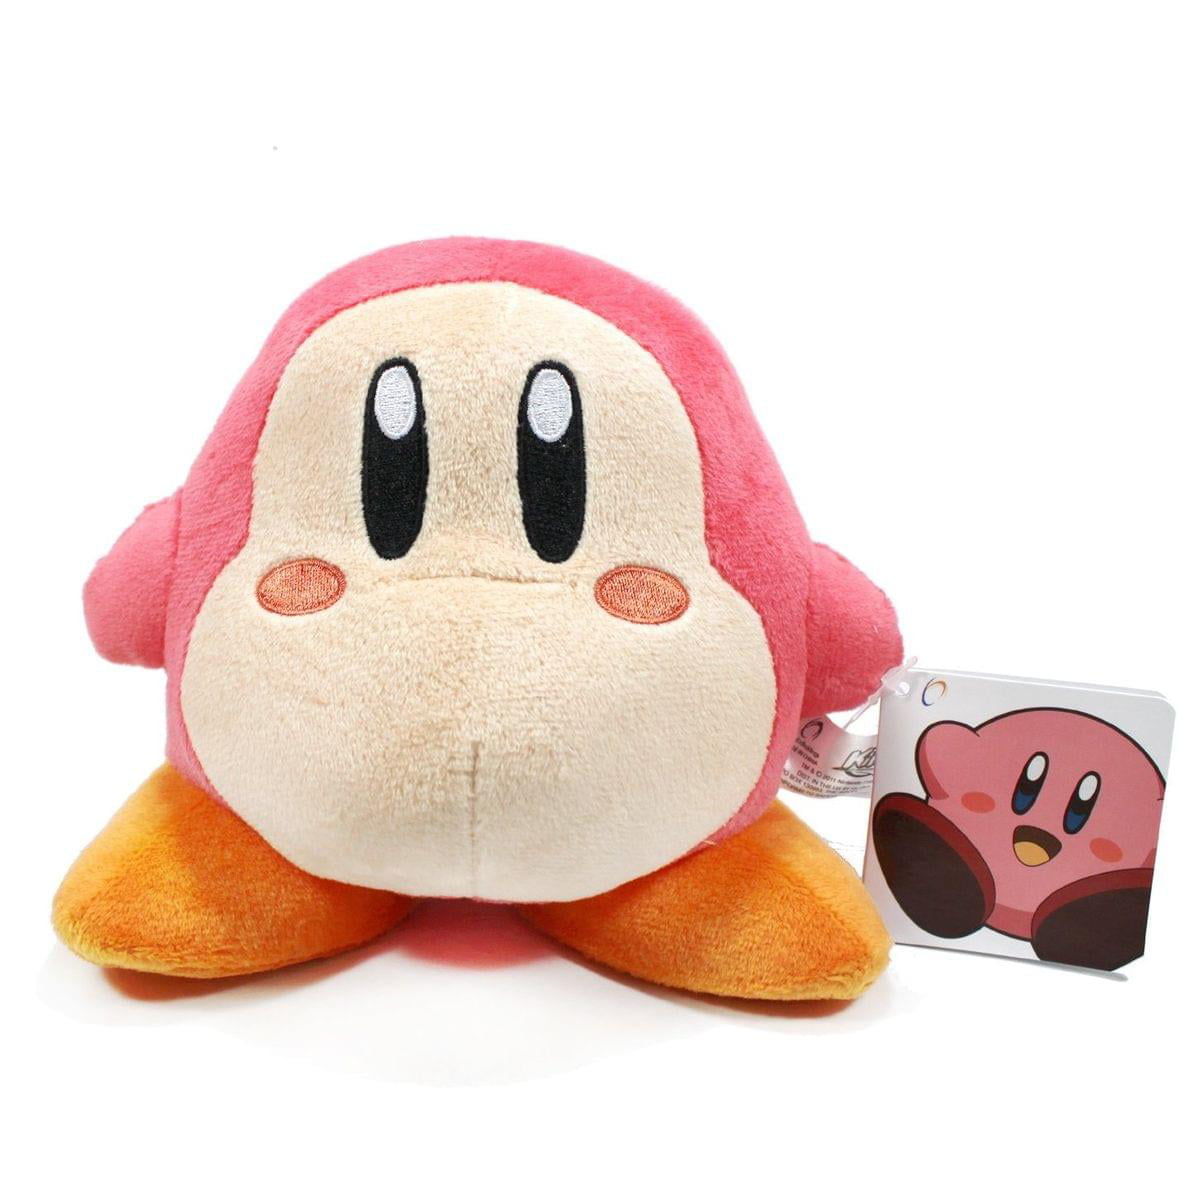 Kirby Dedede Waddle Dee Waddle Doo Plush Soft Toy Stuffed Animal Doll Collection 